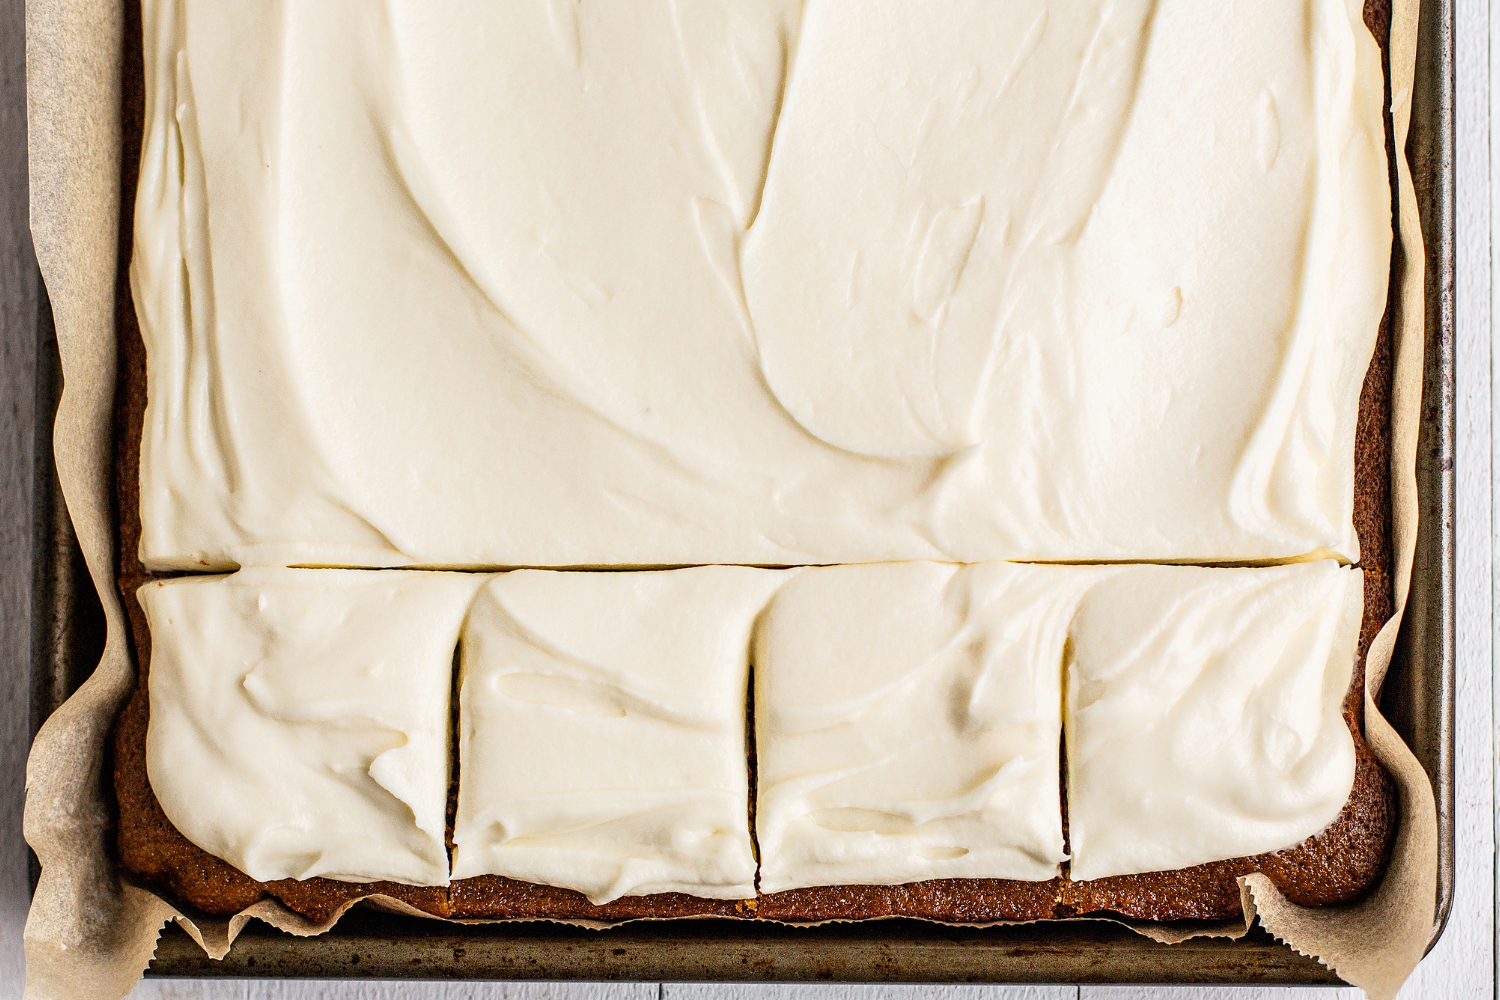 Gingerbread Sheet Cake topped with cream cheese frosting, with part of the cake sliced up to serve.